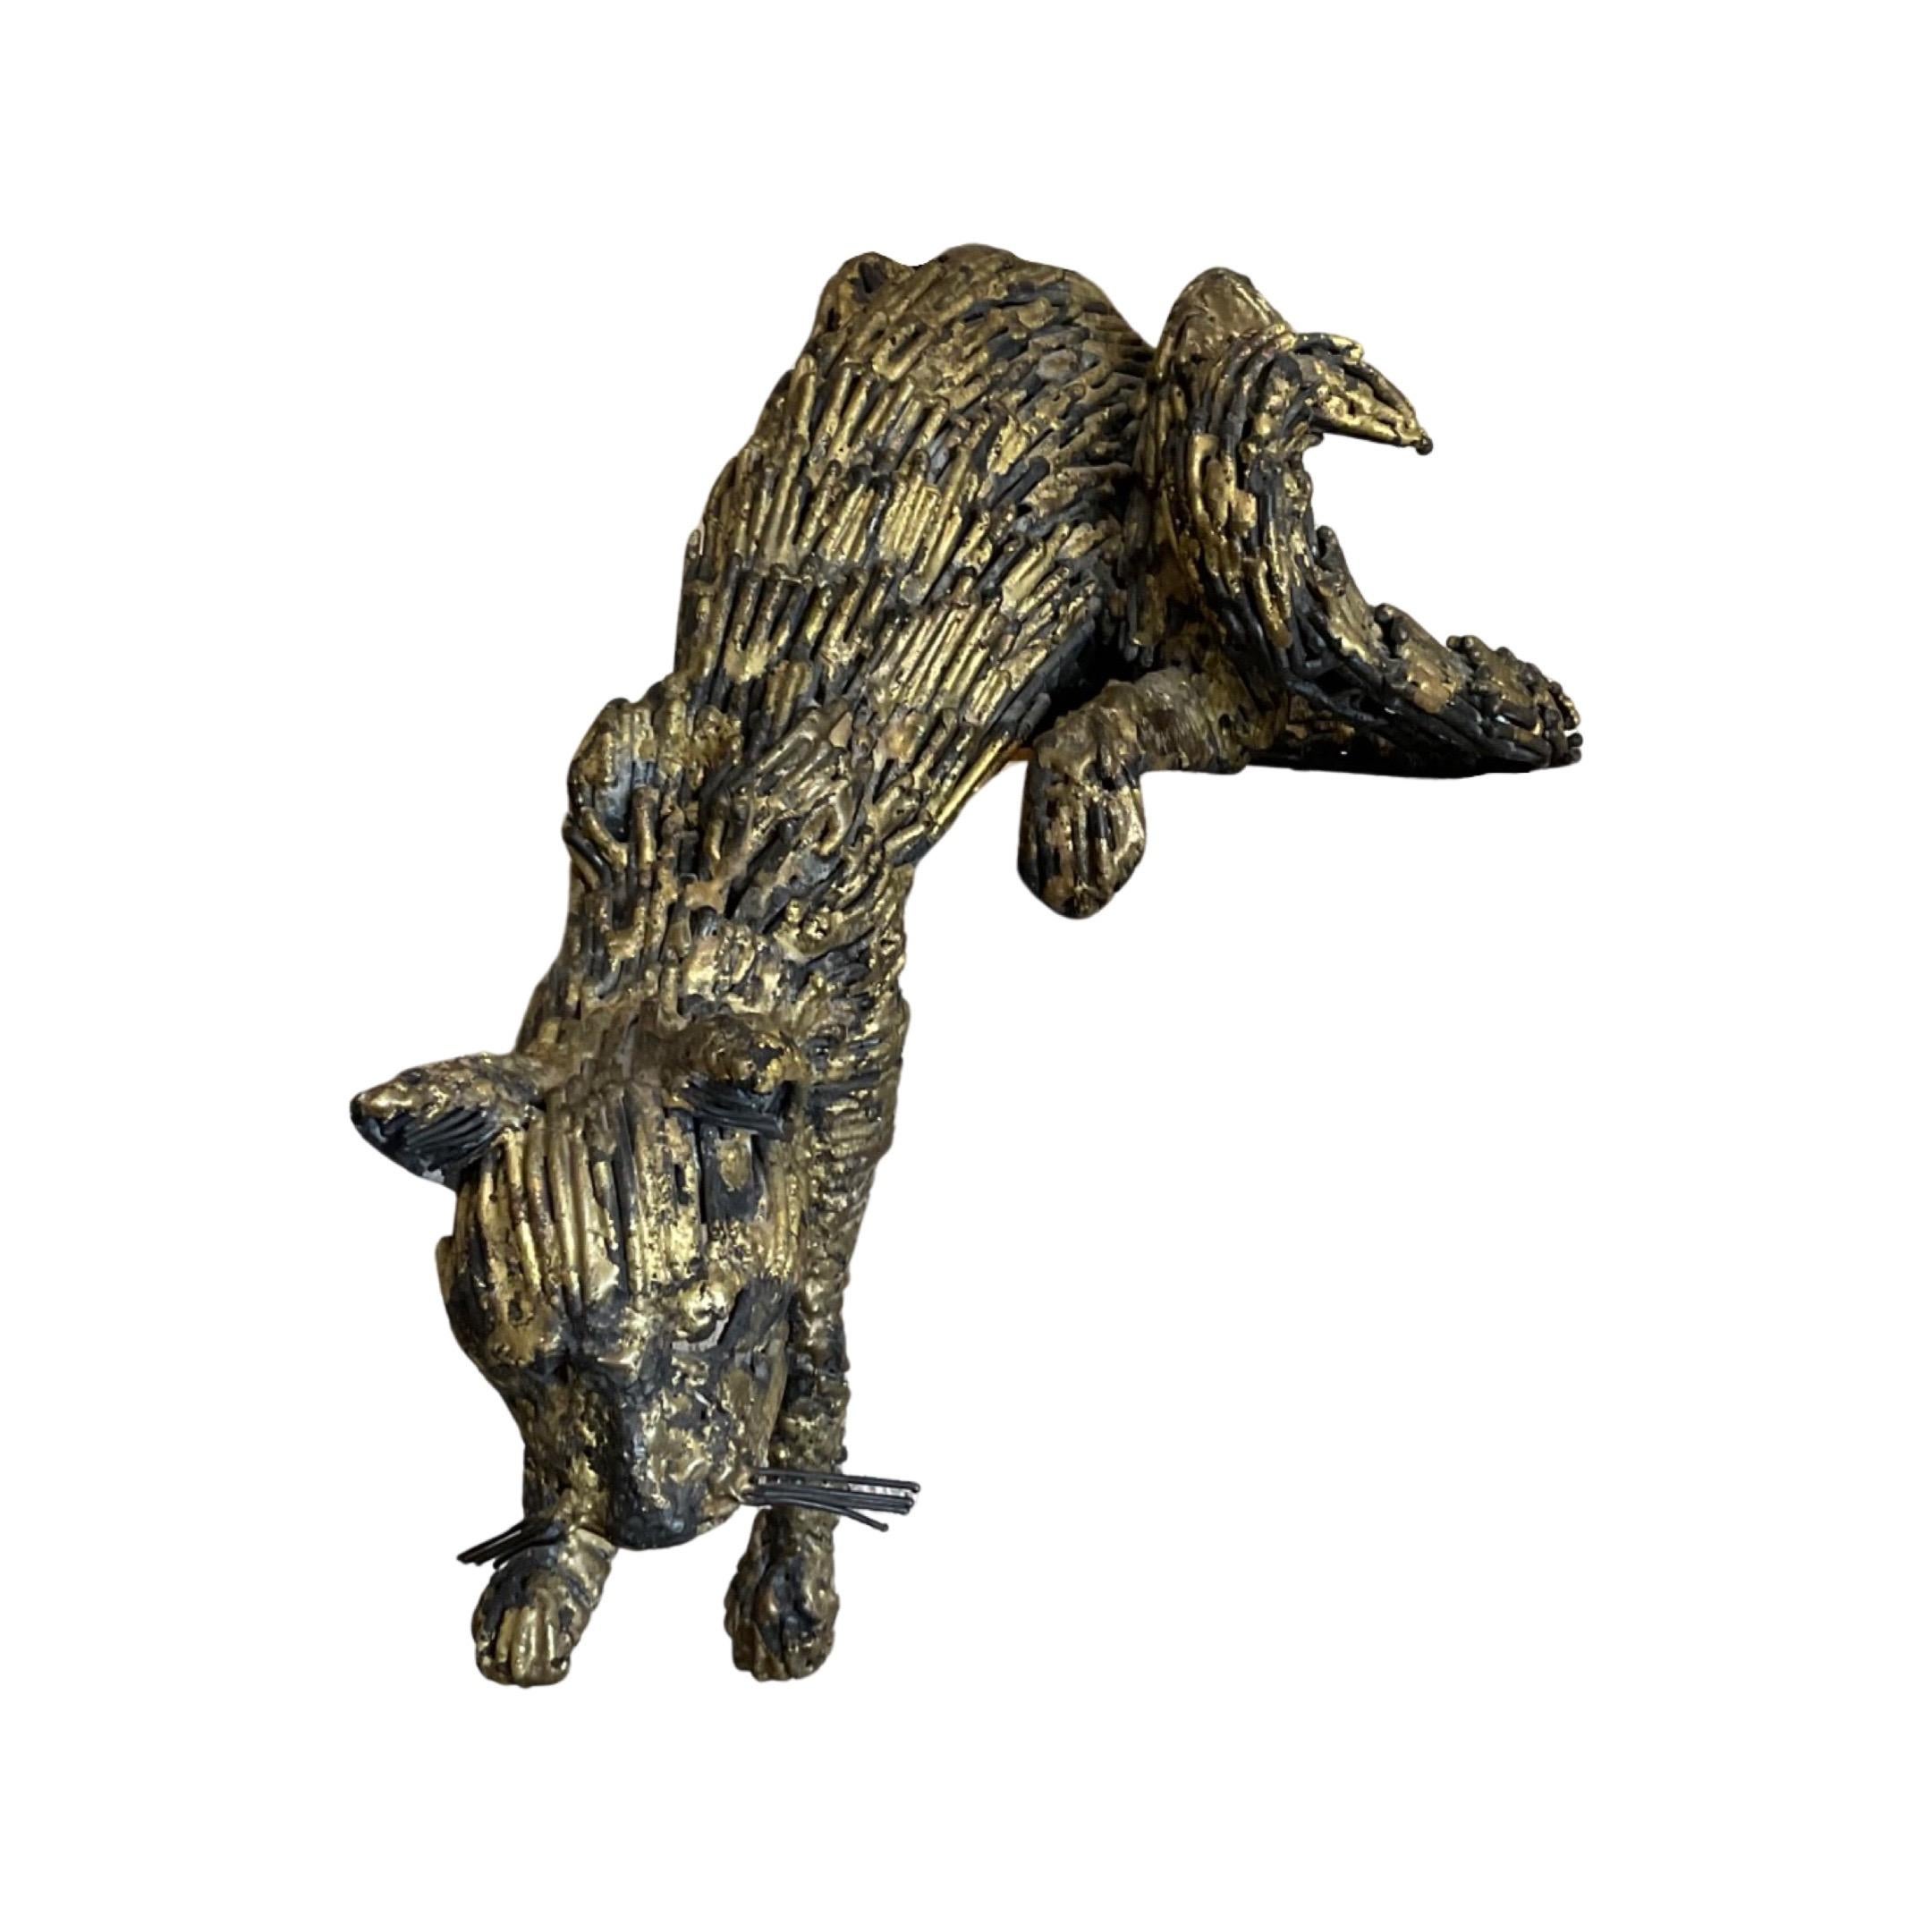 This French-made bronze cat sculpture from 1988 is the perfect way to add a unique, artistic touch to your space. The gold leaf finish and design suited for hanging off a ledge make it an eye-catching piece. Bring the perfect combination of vintage